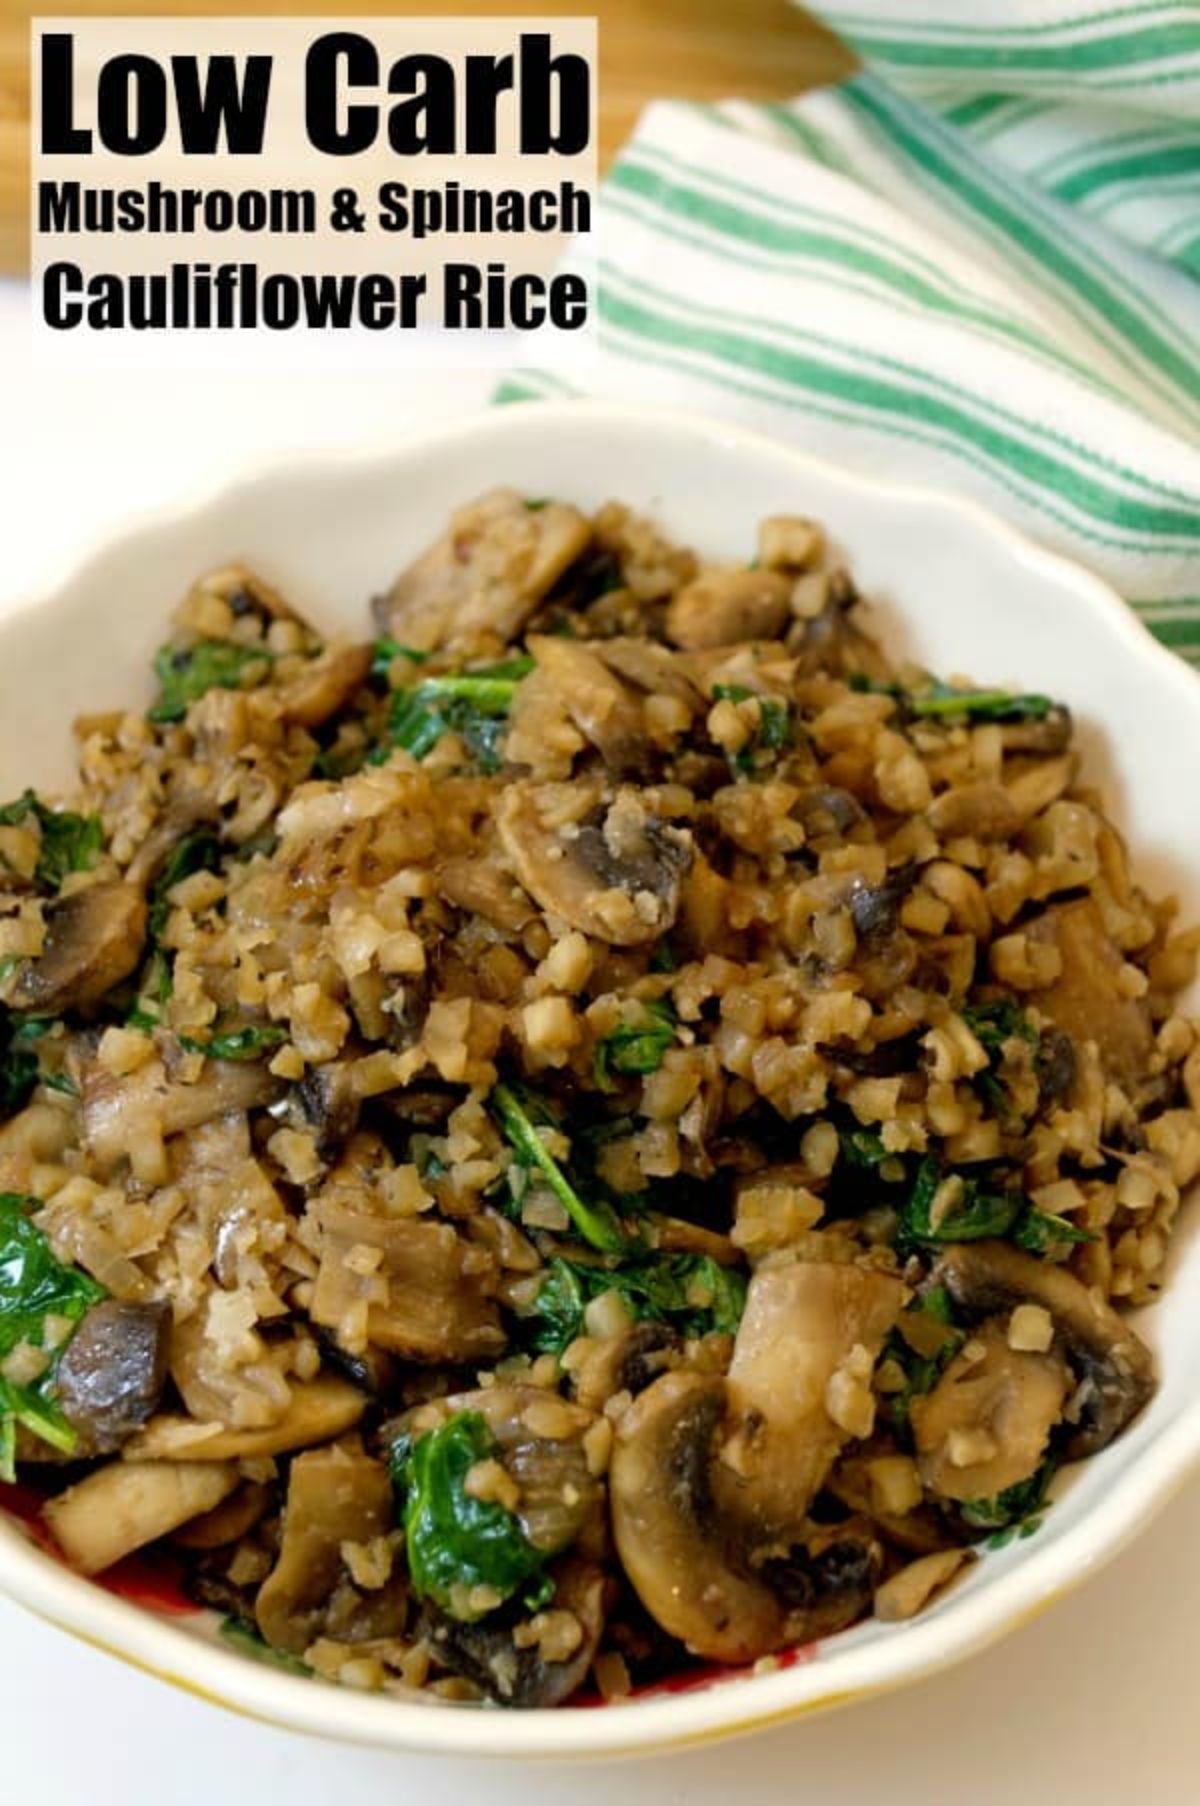 The text reads "Low Carb Mushroom & Spinach Cauliflower Rice". A white round bowl is filled with mushrooms, spinach and cauliflower rice. Behind is a blurred green and white striped towel